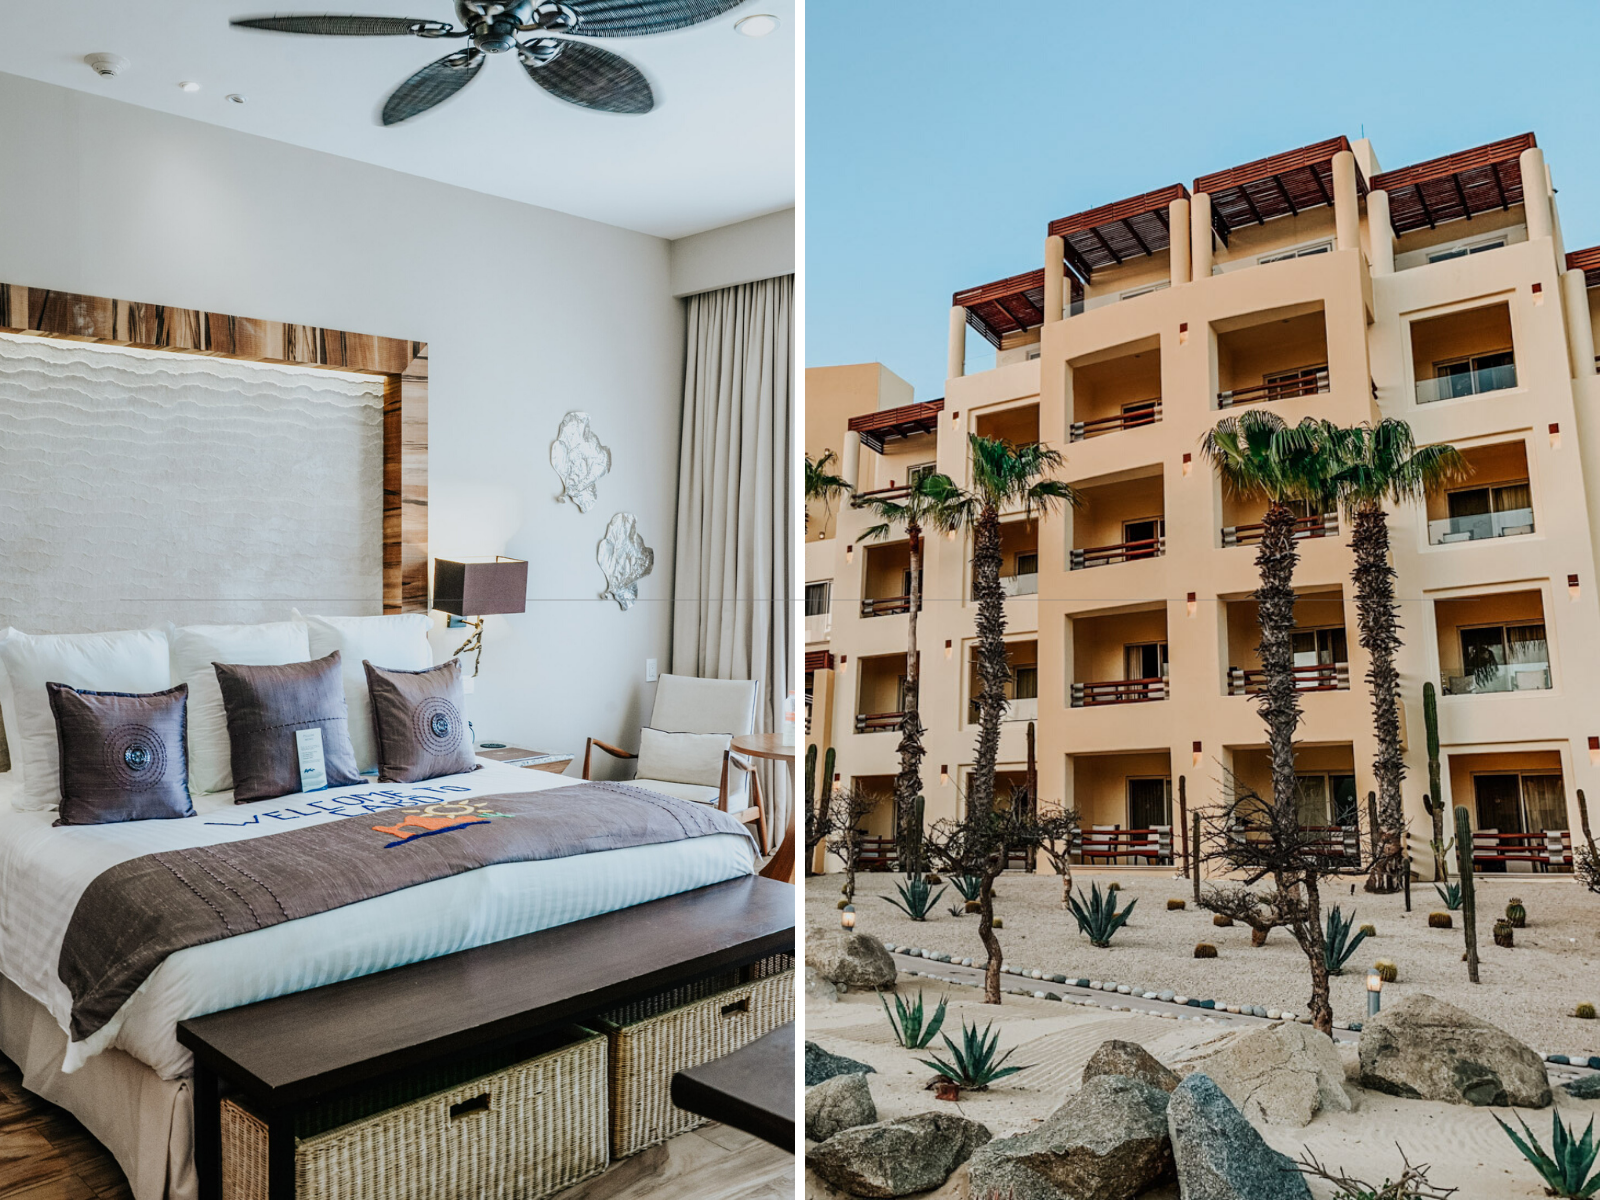 Pueblo Bonito Pacifica: 8 Reasons to Vacation in Cabo by popular Tennessee travel blog, Lone Star Looking Glass: image of a room and courtyard at the Pueblo Bonita Pacifica. 